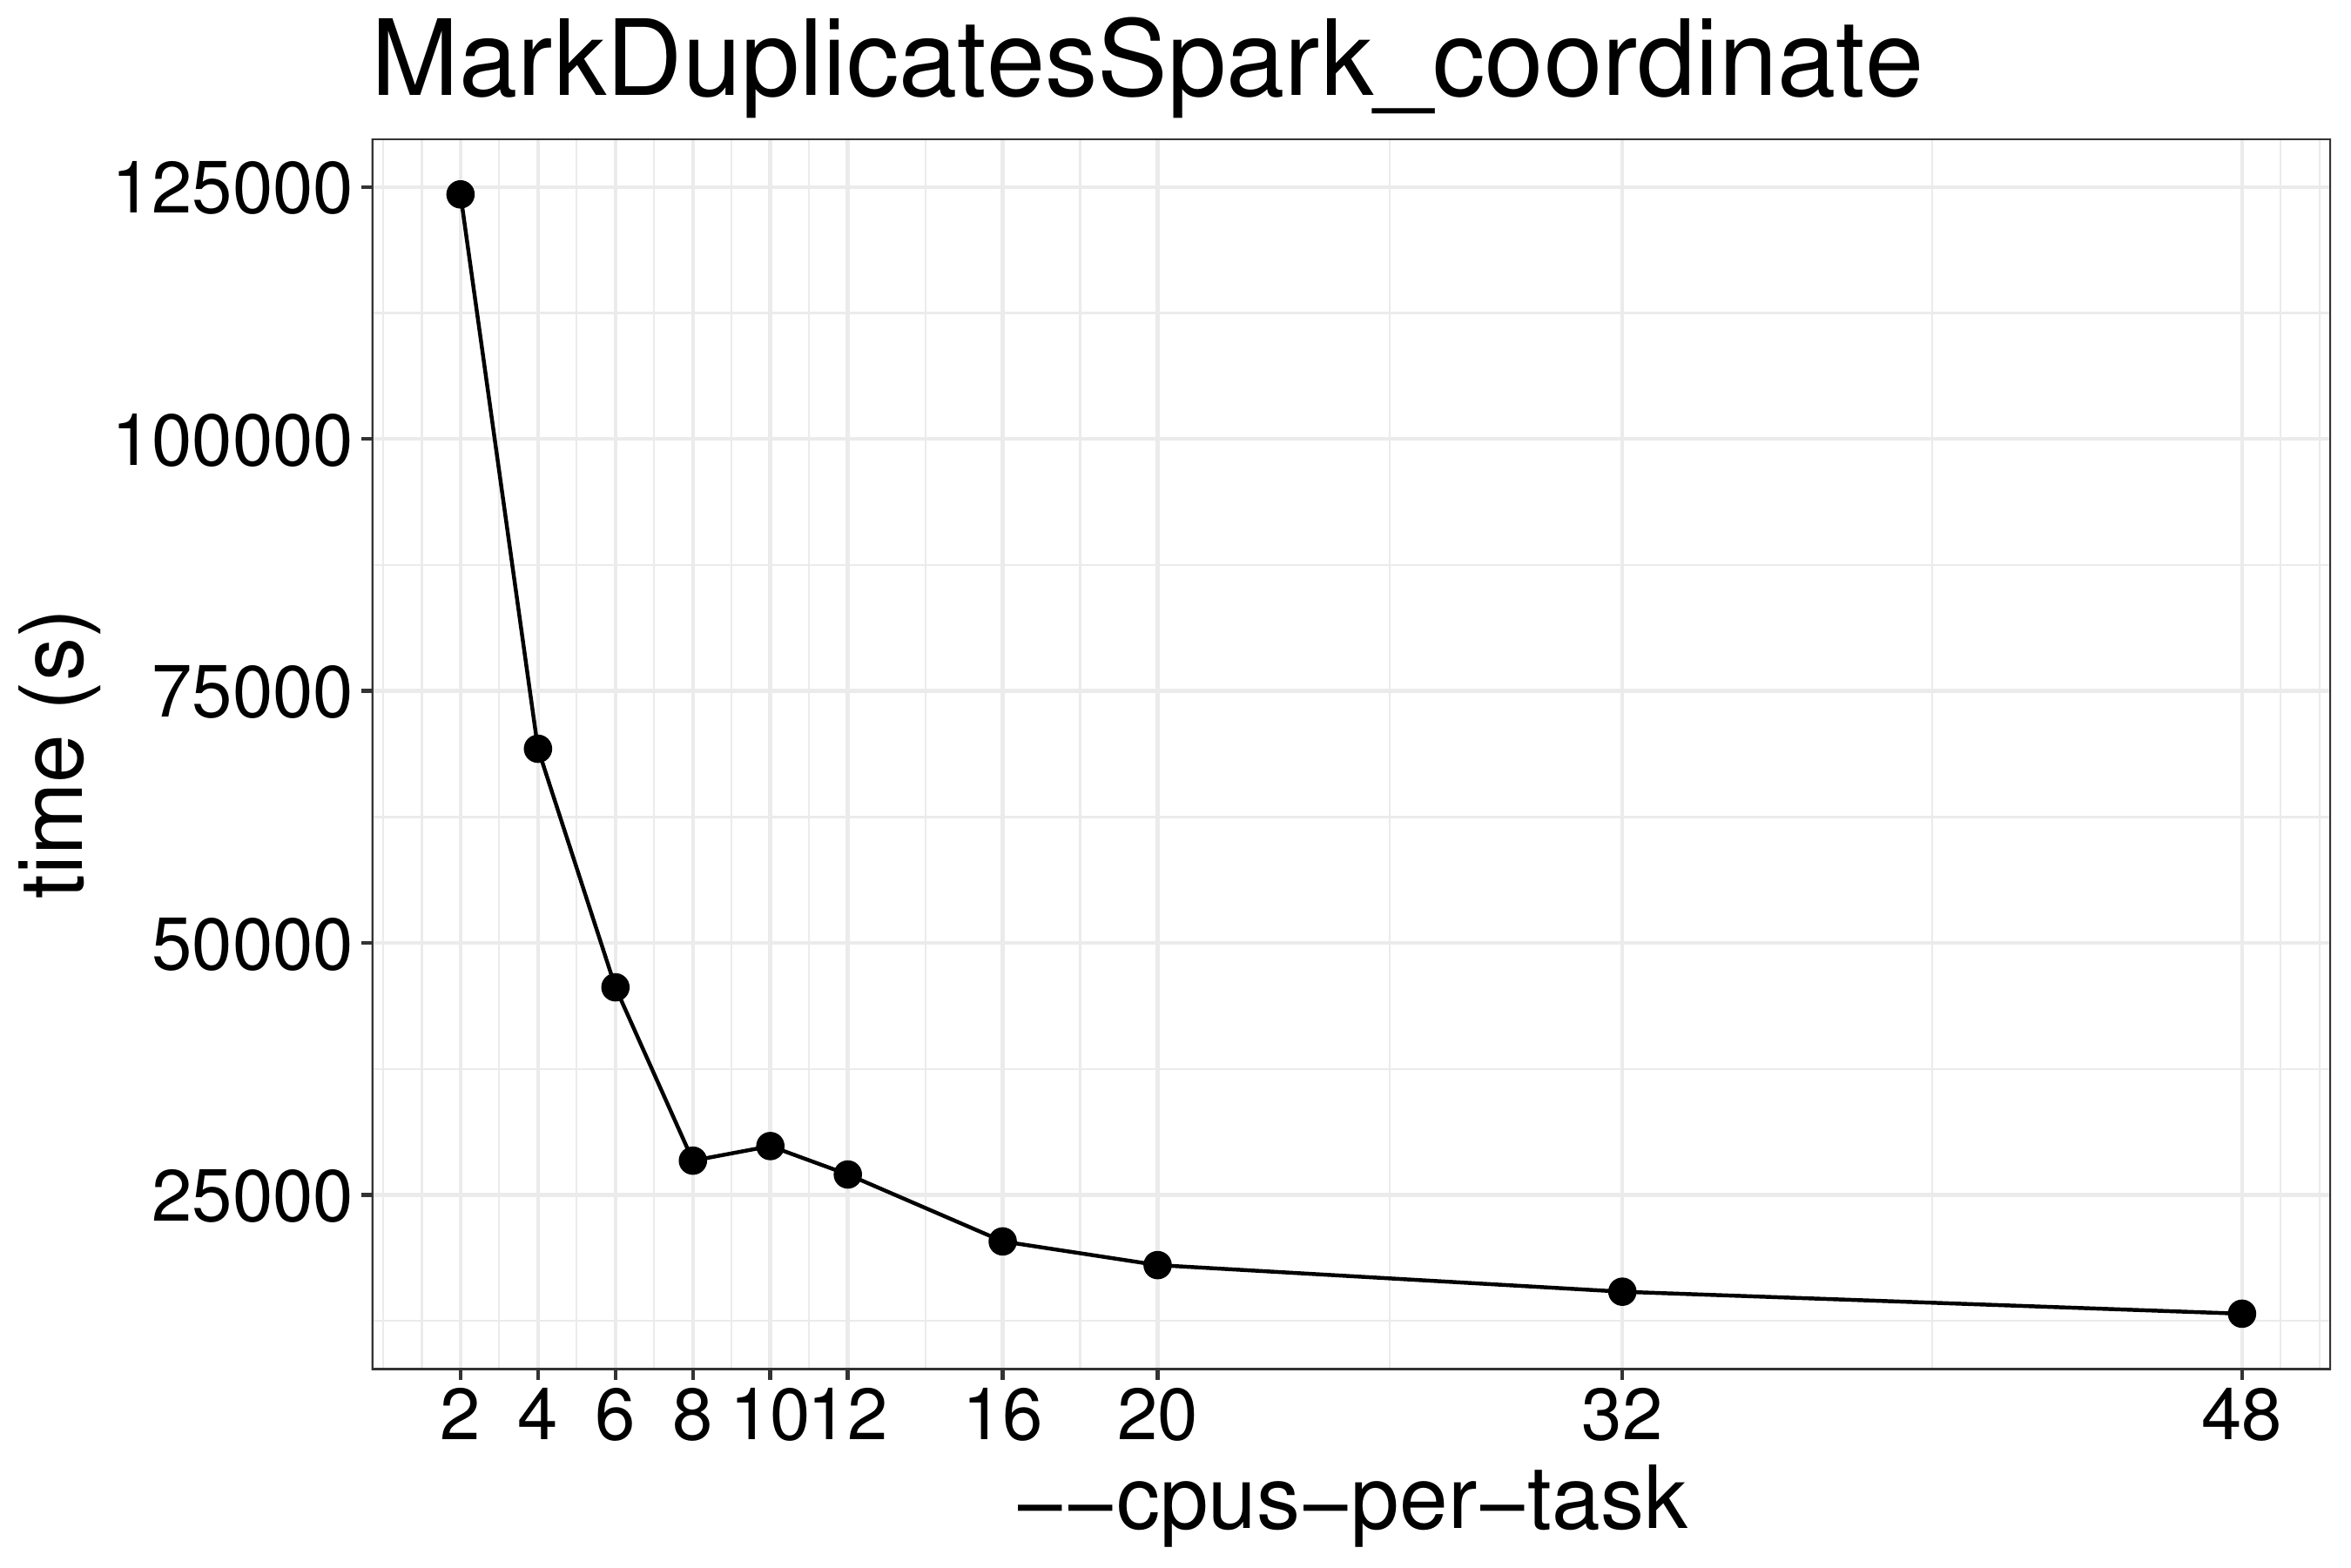 MarkDuplicatesSpark runtime with different numbers of threads.